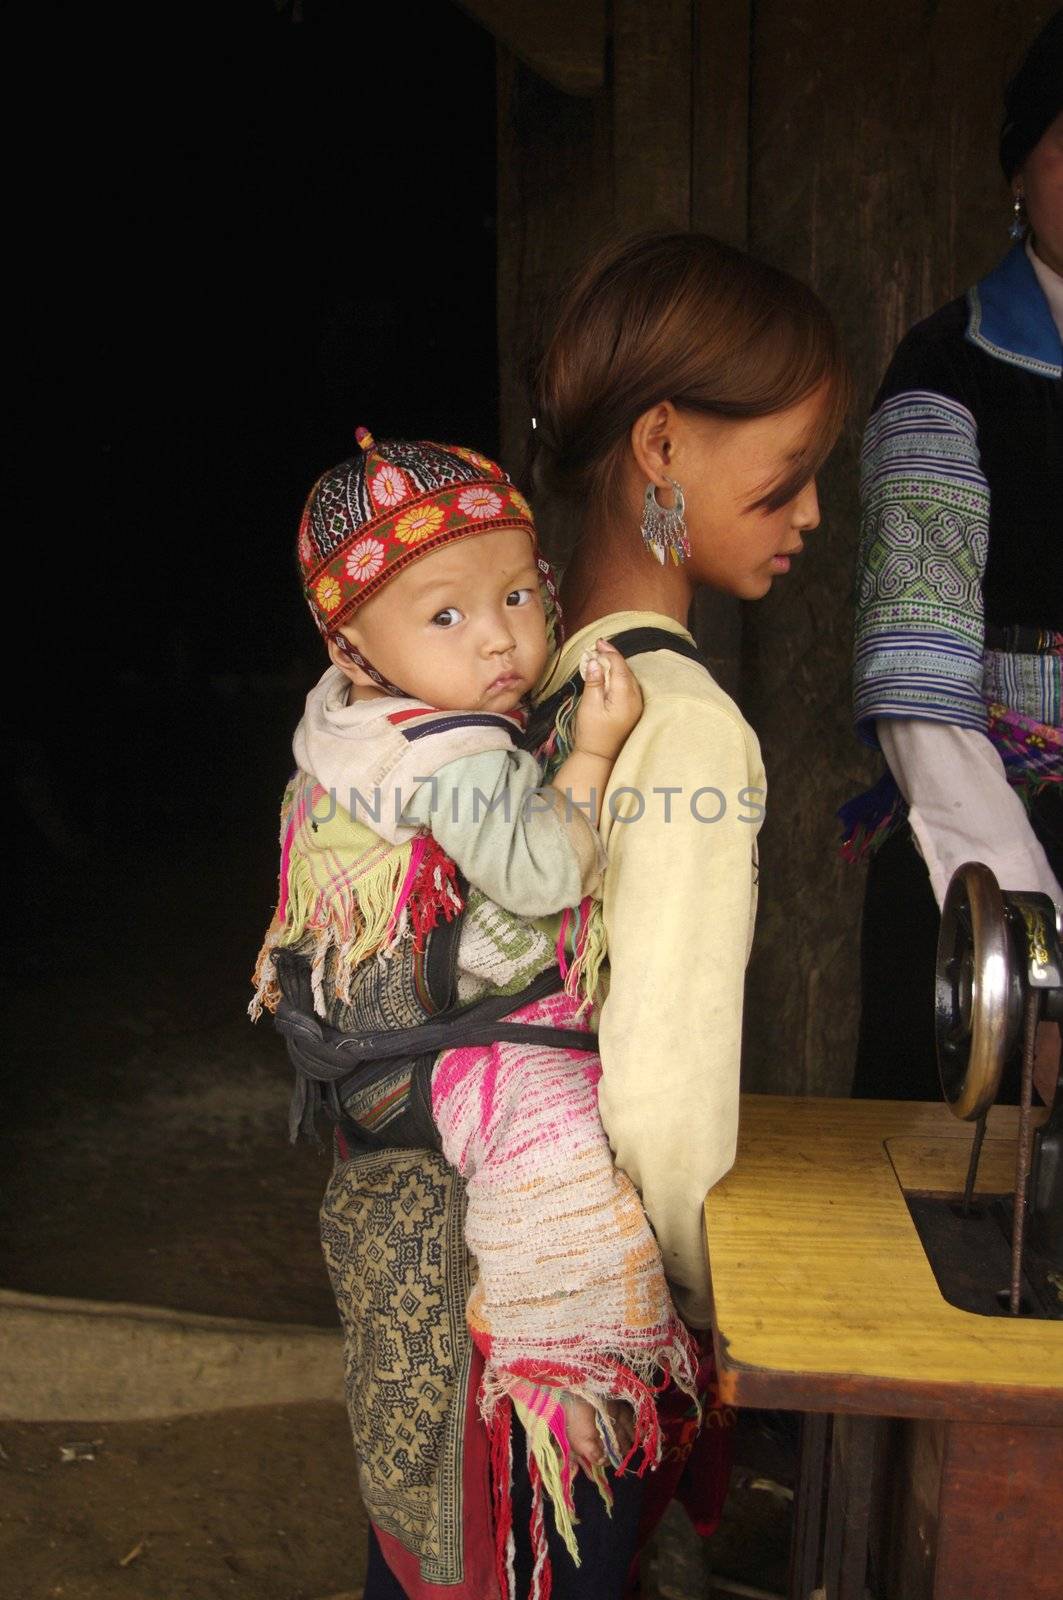 Since their very young age girls are accustomed to bear children in the back. In many families in northern Vietnam are often the elders who carry the new born.